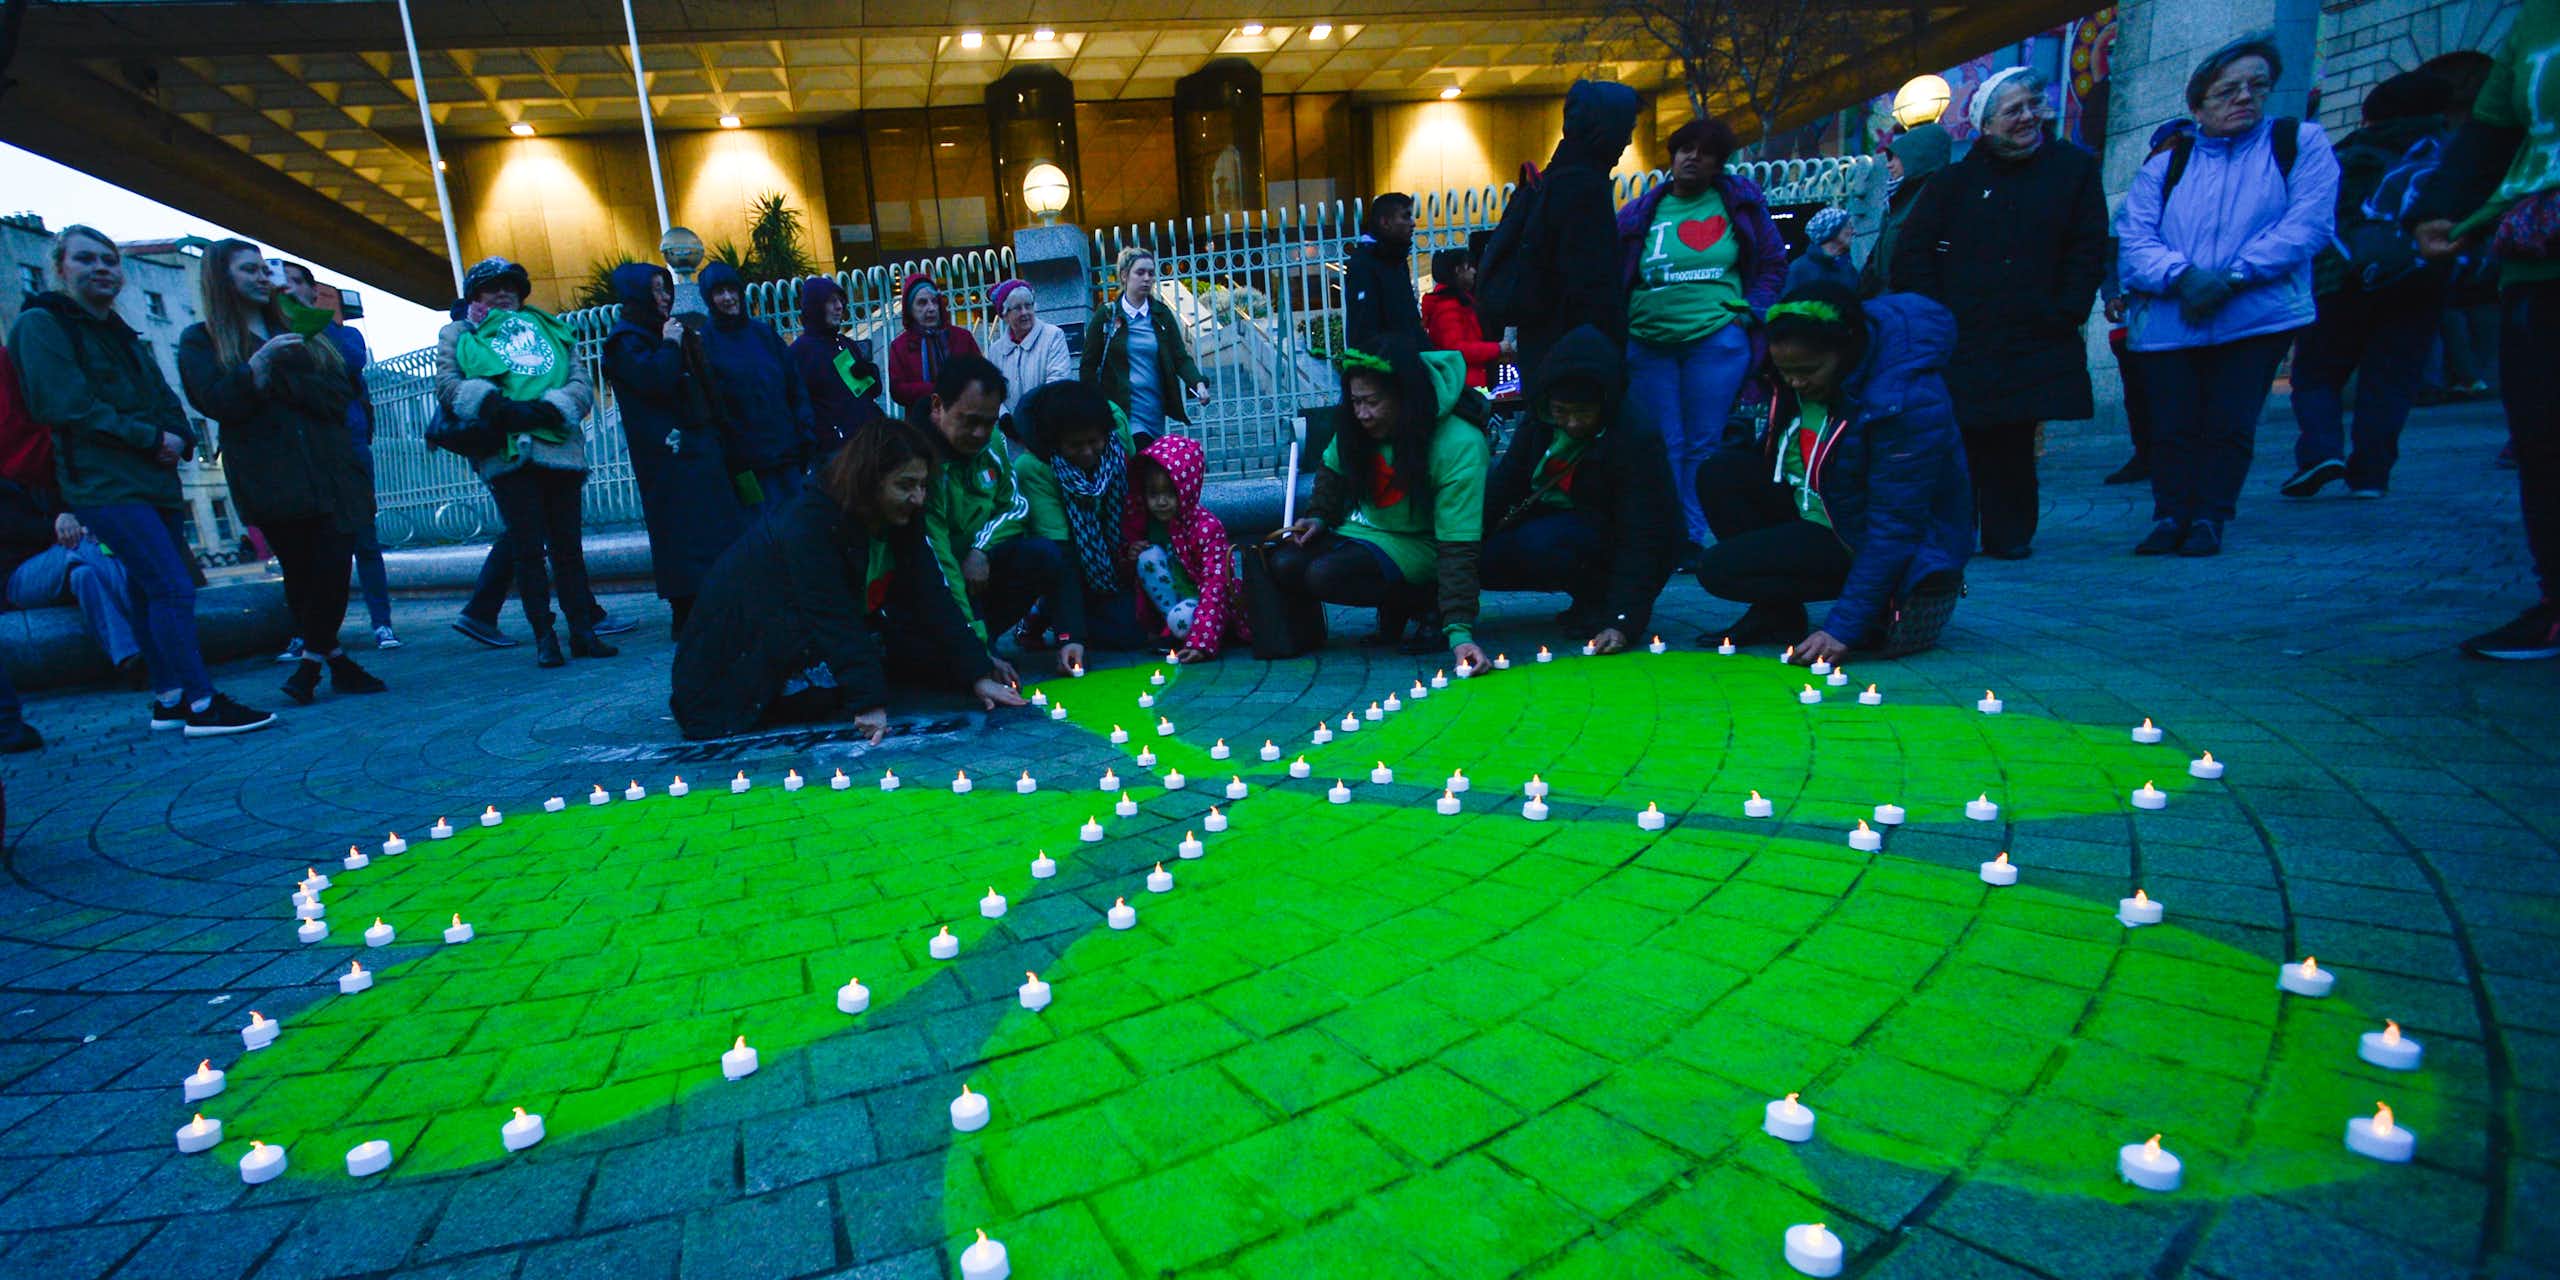 A green shamrock is painted on stone pavement surrounded by people in 'I heart Ireland' T-shirts.